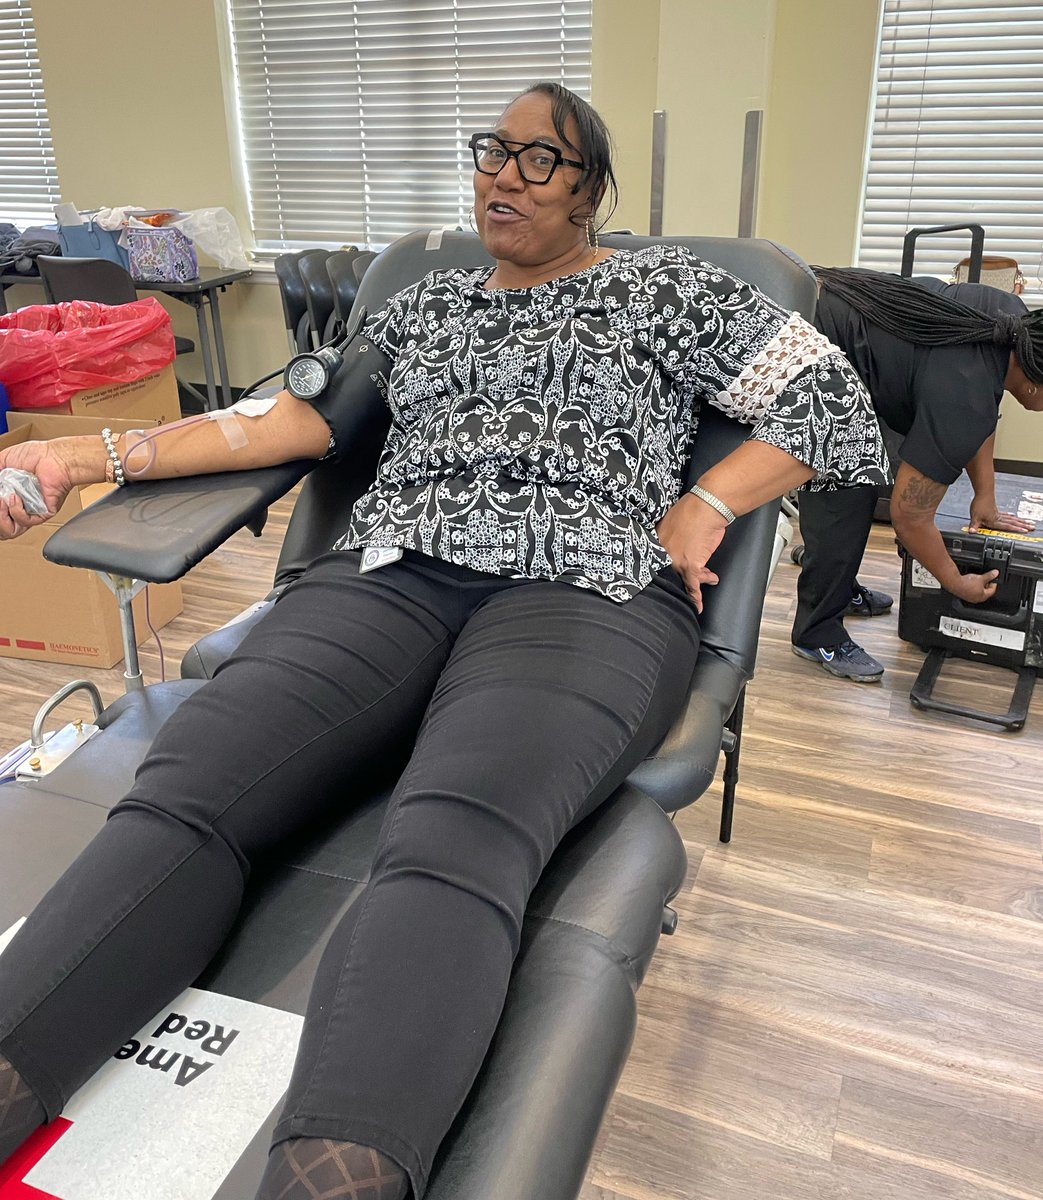 This week, GDC HQ hosted a blood drive to assist the @American Red Cross. We appreciate the 13 campus staff and 24 BCOT cadets who donated and displayed our cultural values of better together and taking ownership.